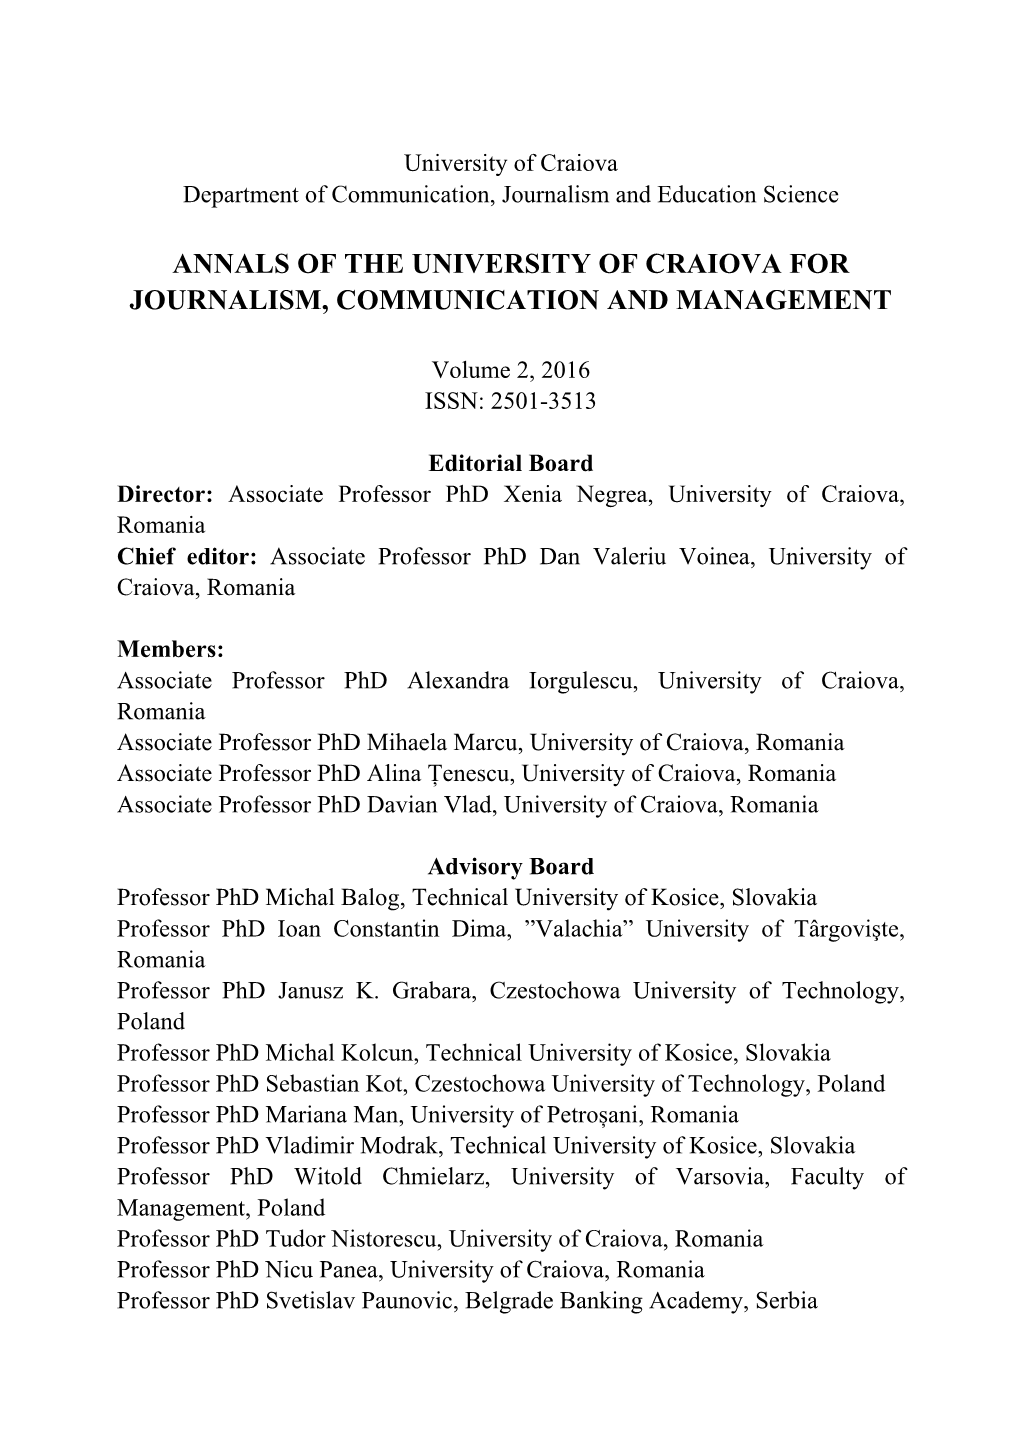 Annals of the University of Craiova for Journalism, Communication and Management